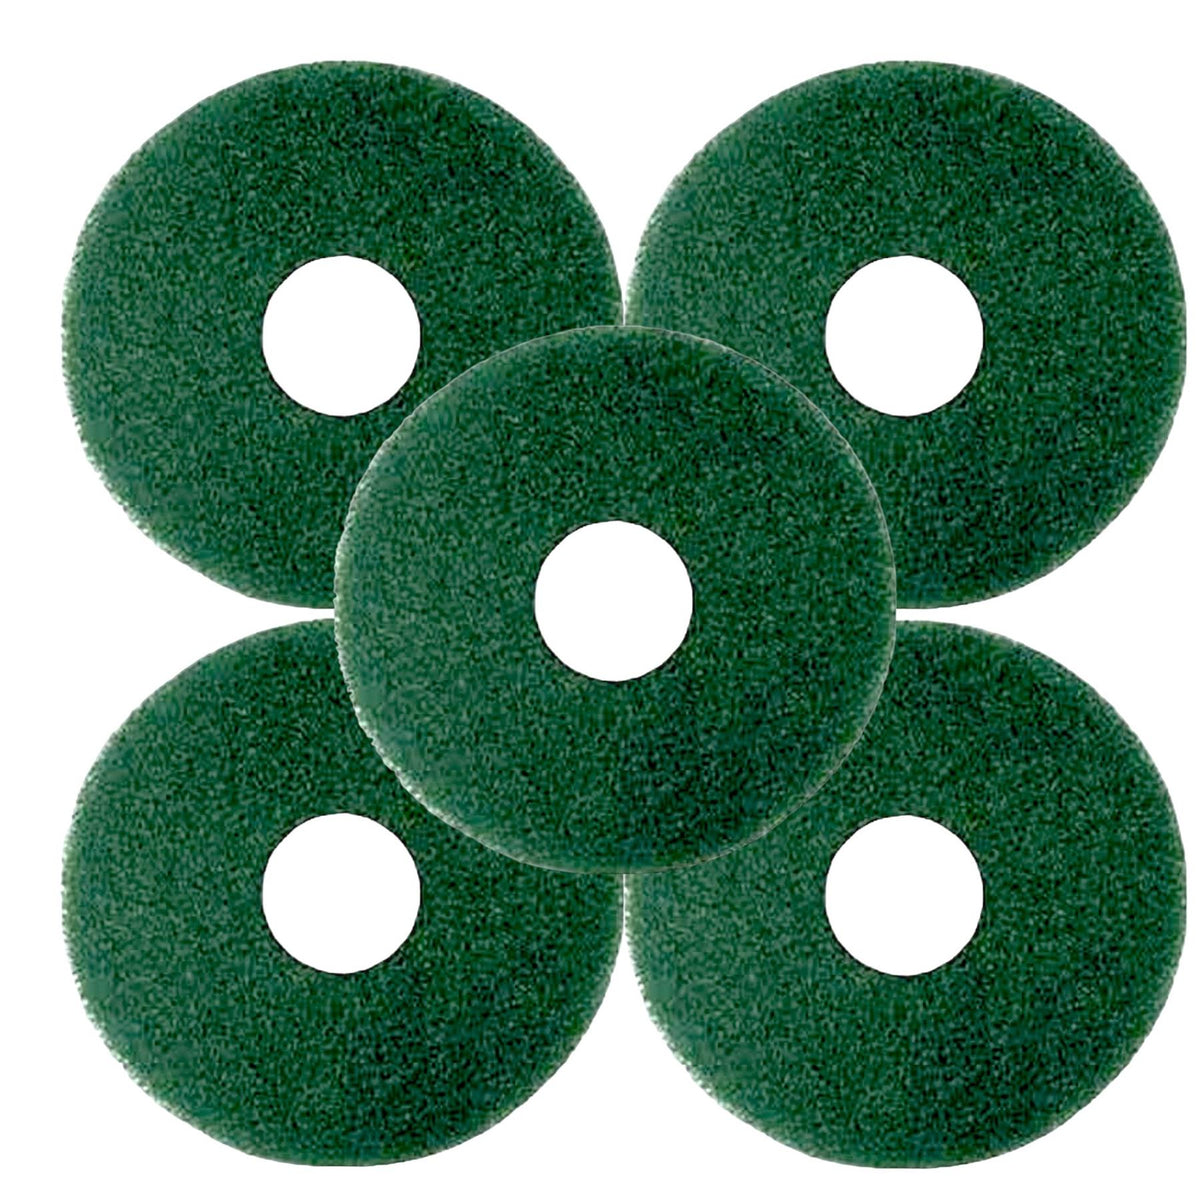 Green Floor Pads Pack of 5 14 inch Pads For Machine Buffing